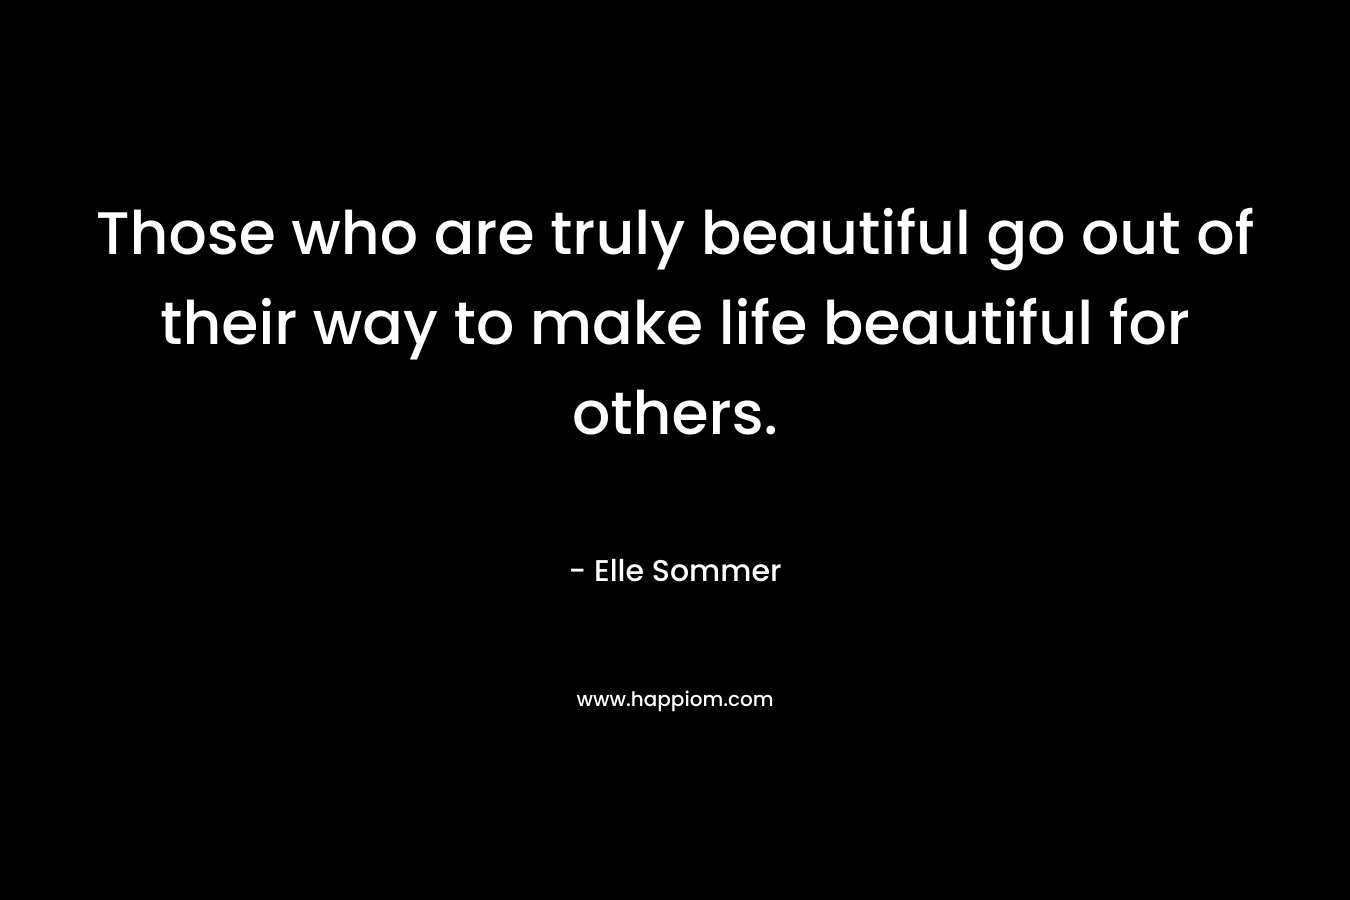 Those who are truly beautiful go out of their way to make life beautiful for others.